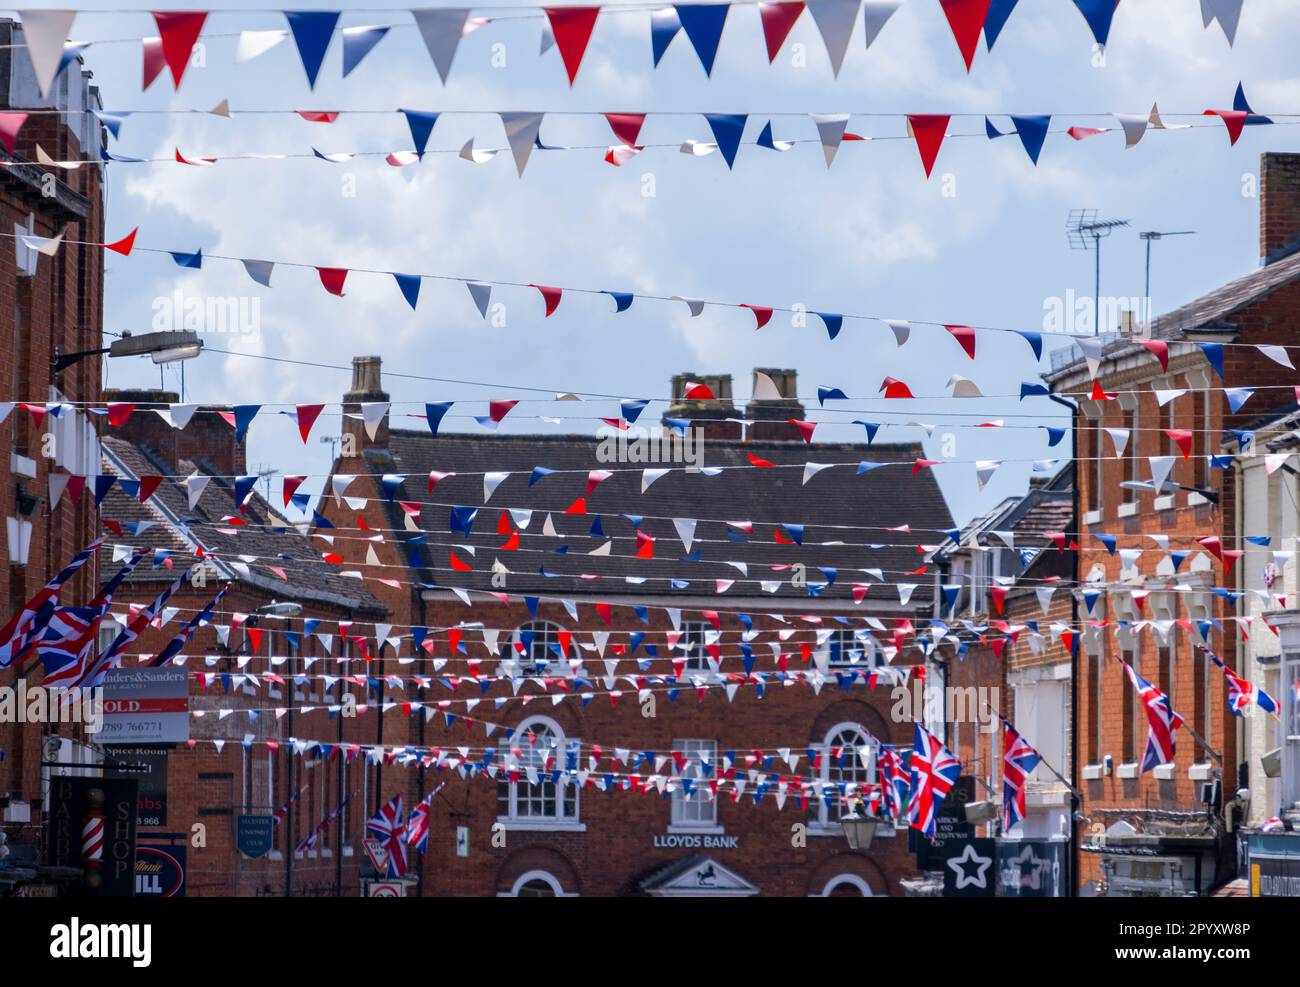 Celebrations in the Warwickshire town of Alcester, UK ready for the Coronation of King Charles III.  Flags and bunting adorn the high street. Stock Photo